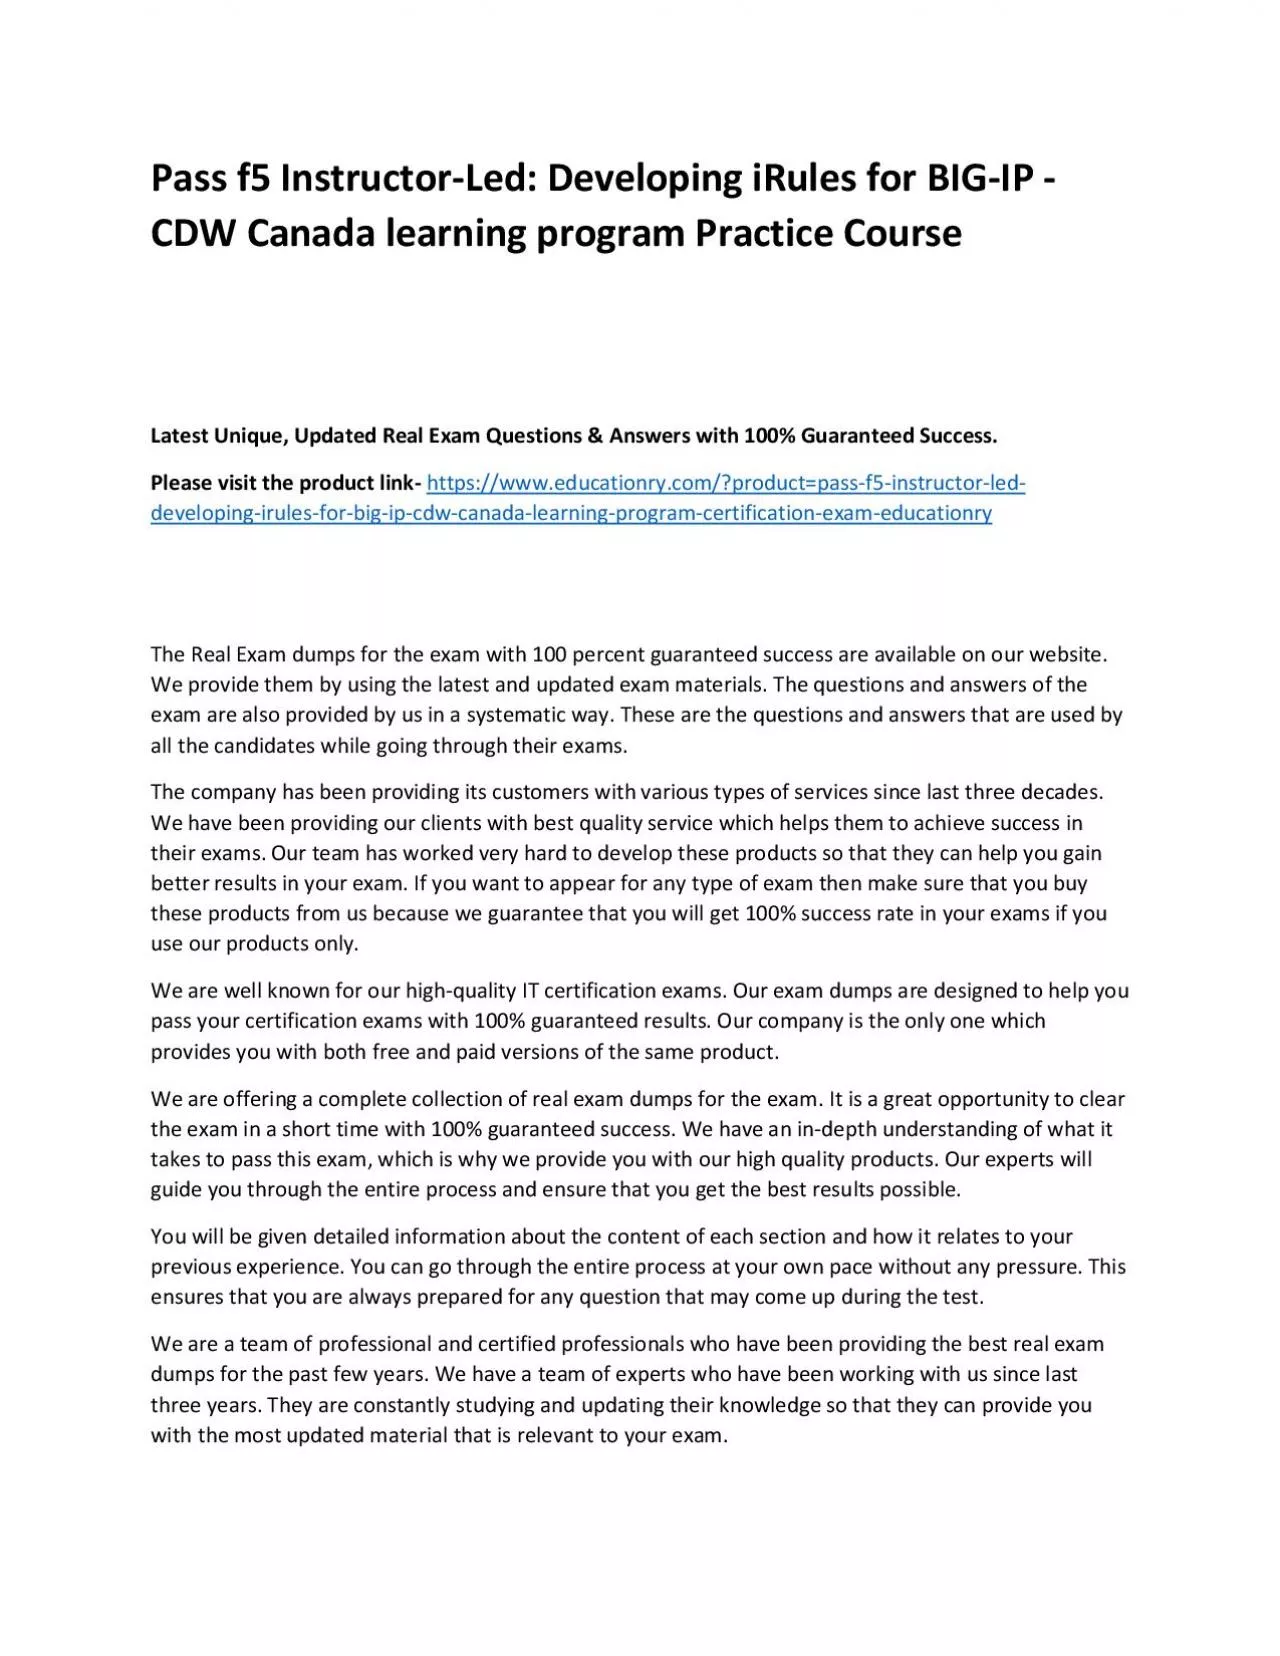 f5 Instructor-Led: Developing iRules for BIG-IP - CDW Canada learning program